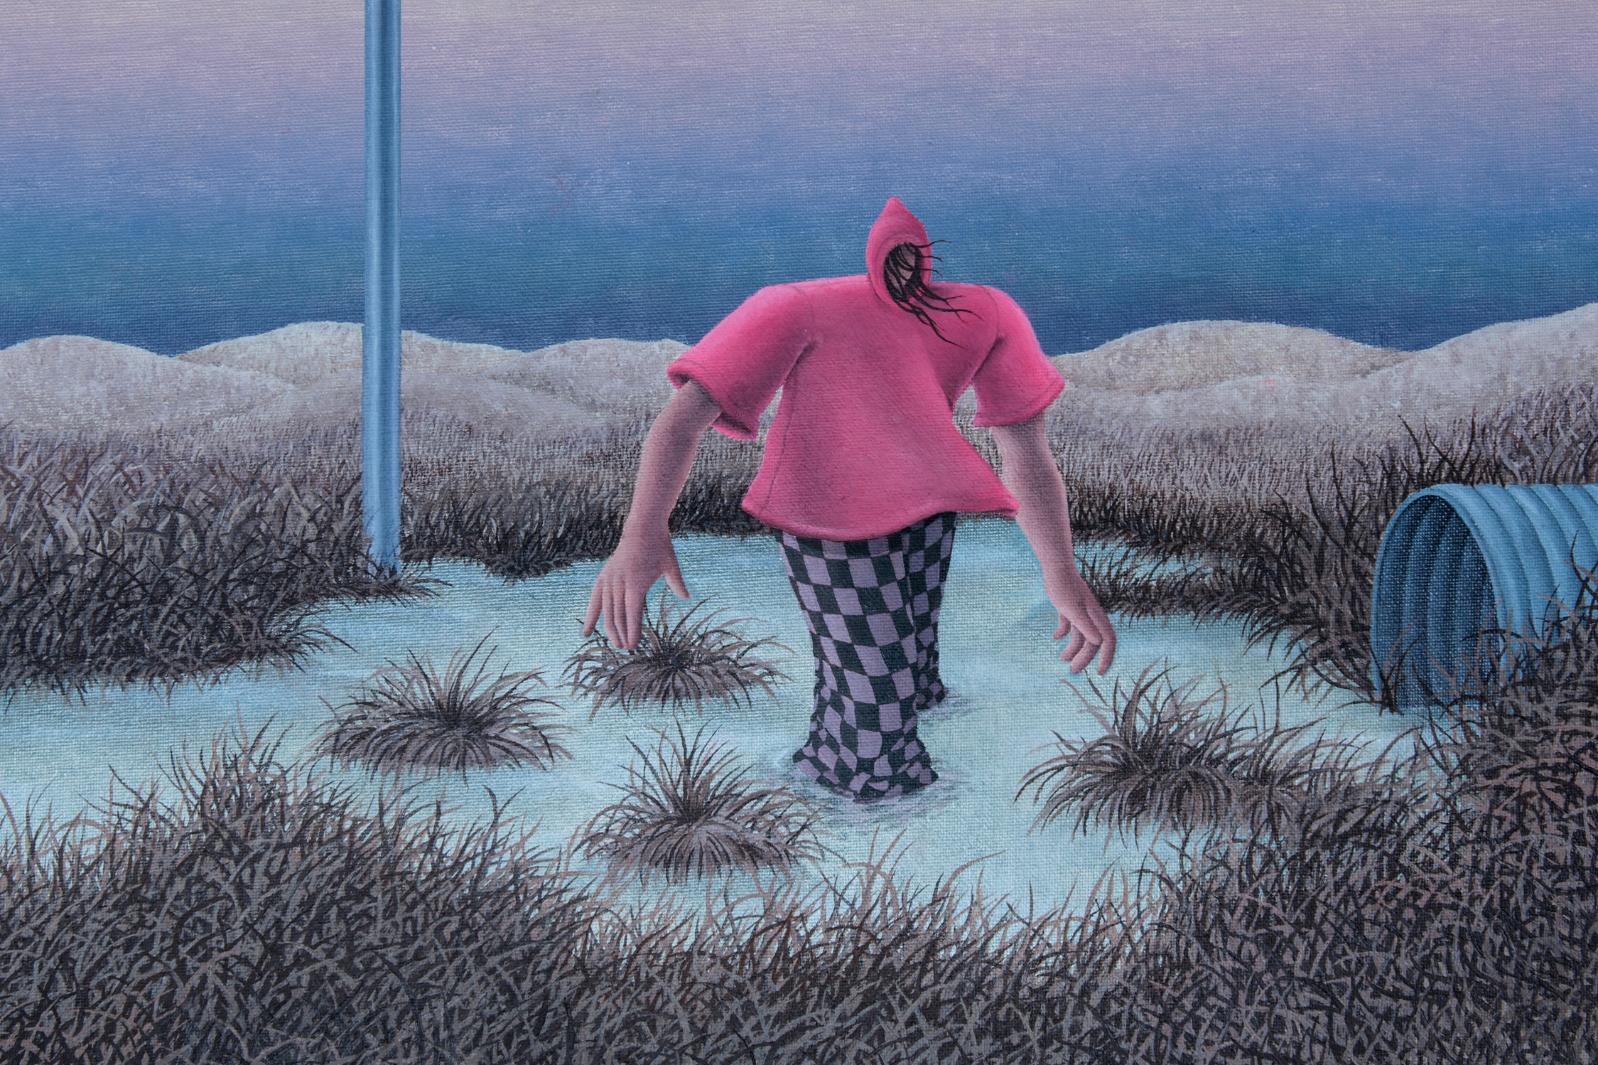 drawing of distorted figure in a swamp with a pink hoodie and check trousers.